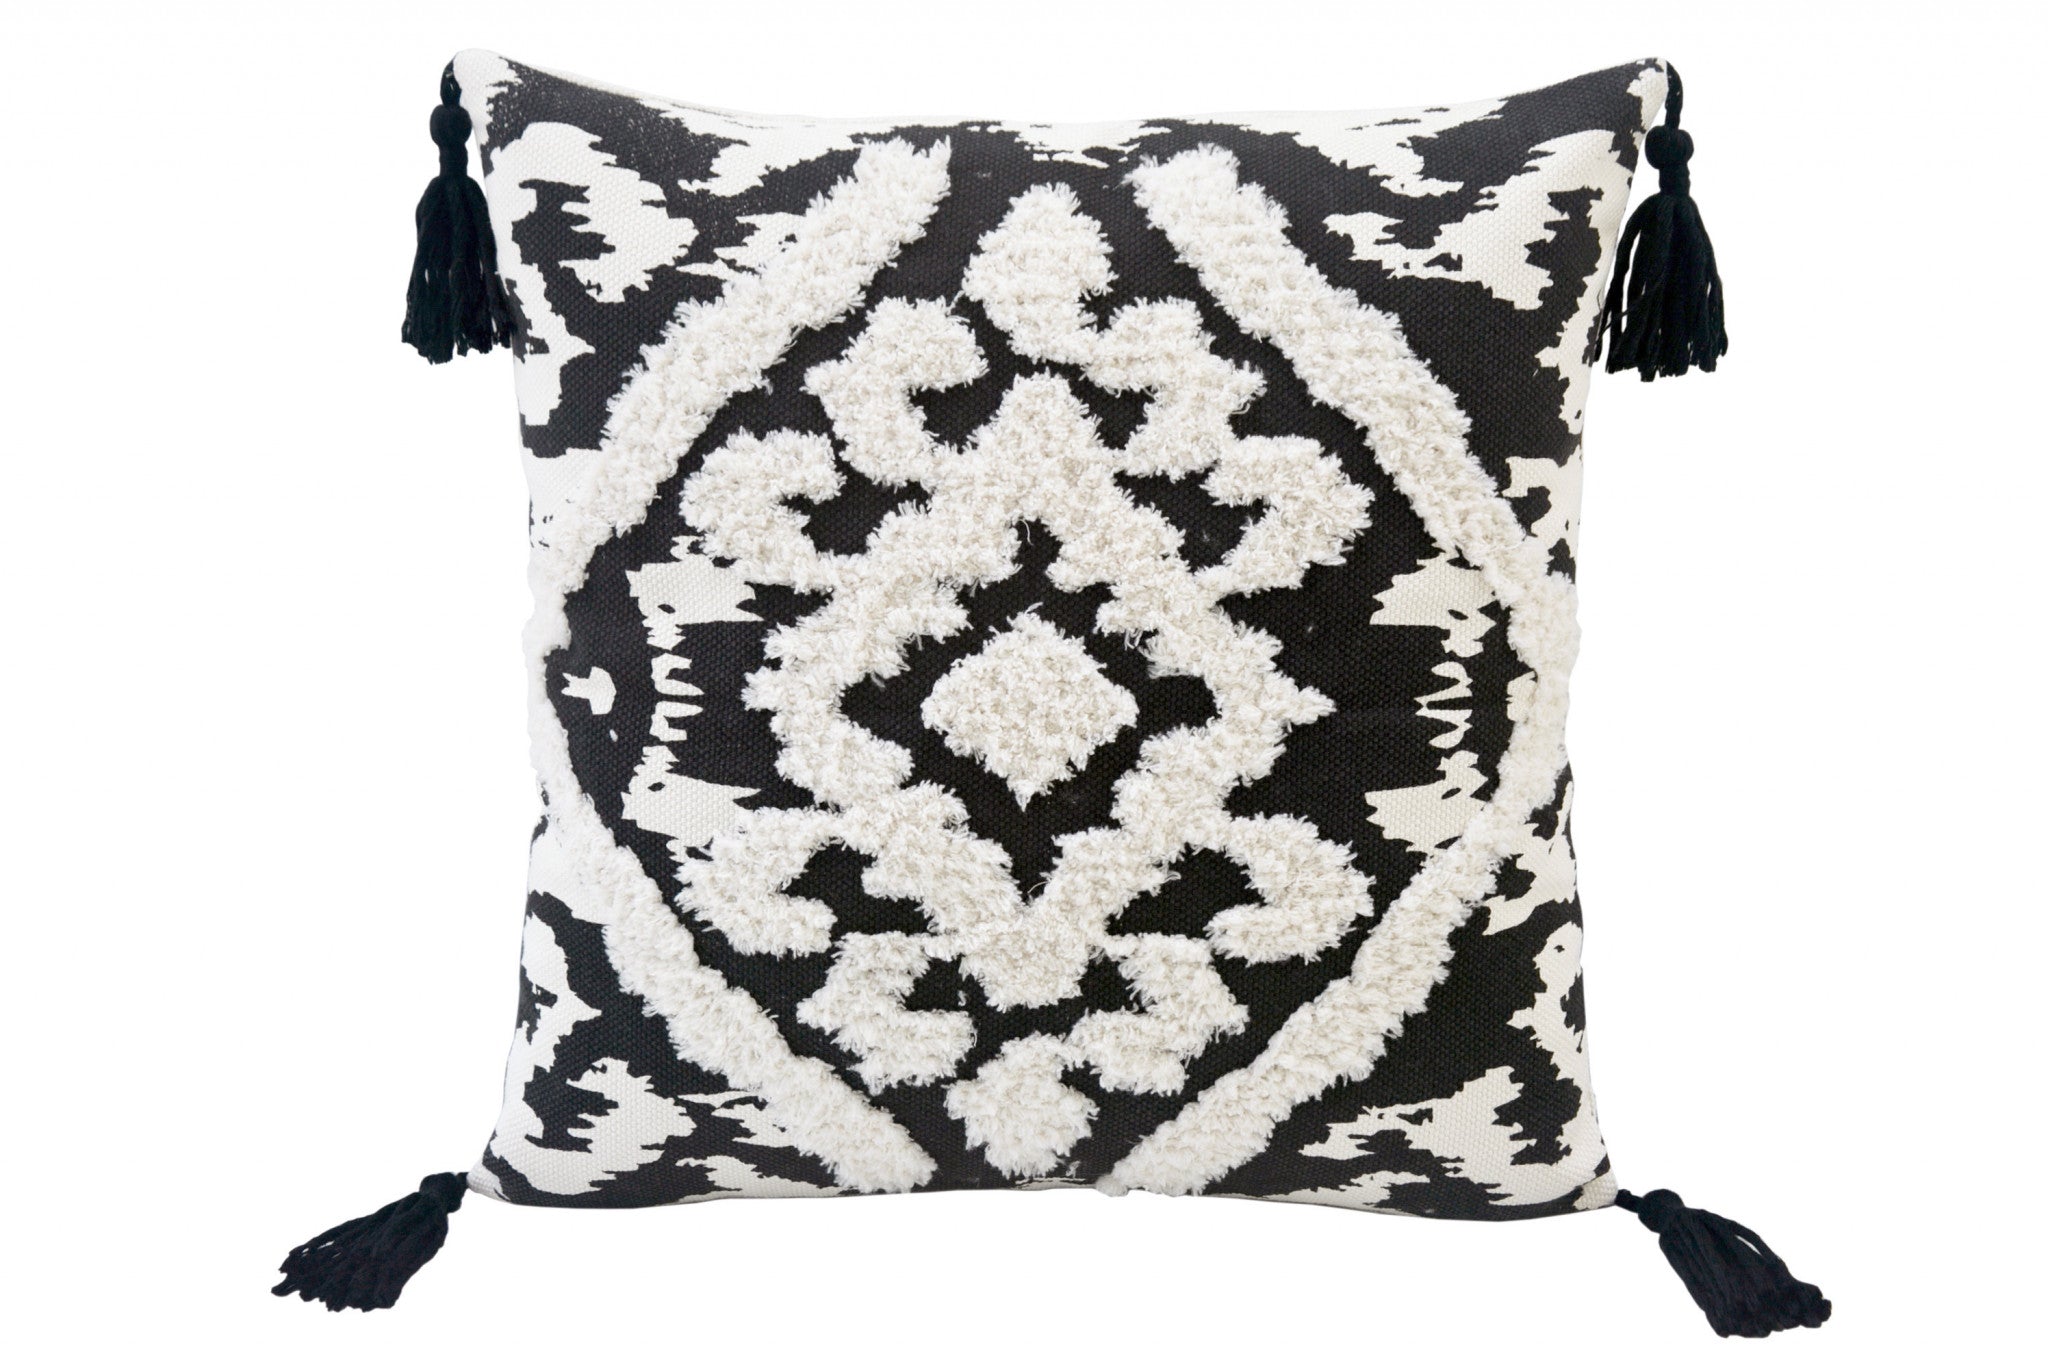 17" X 17" Black and White Textural Geometric Throw Pillow With Tassels